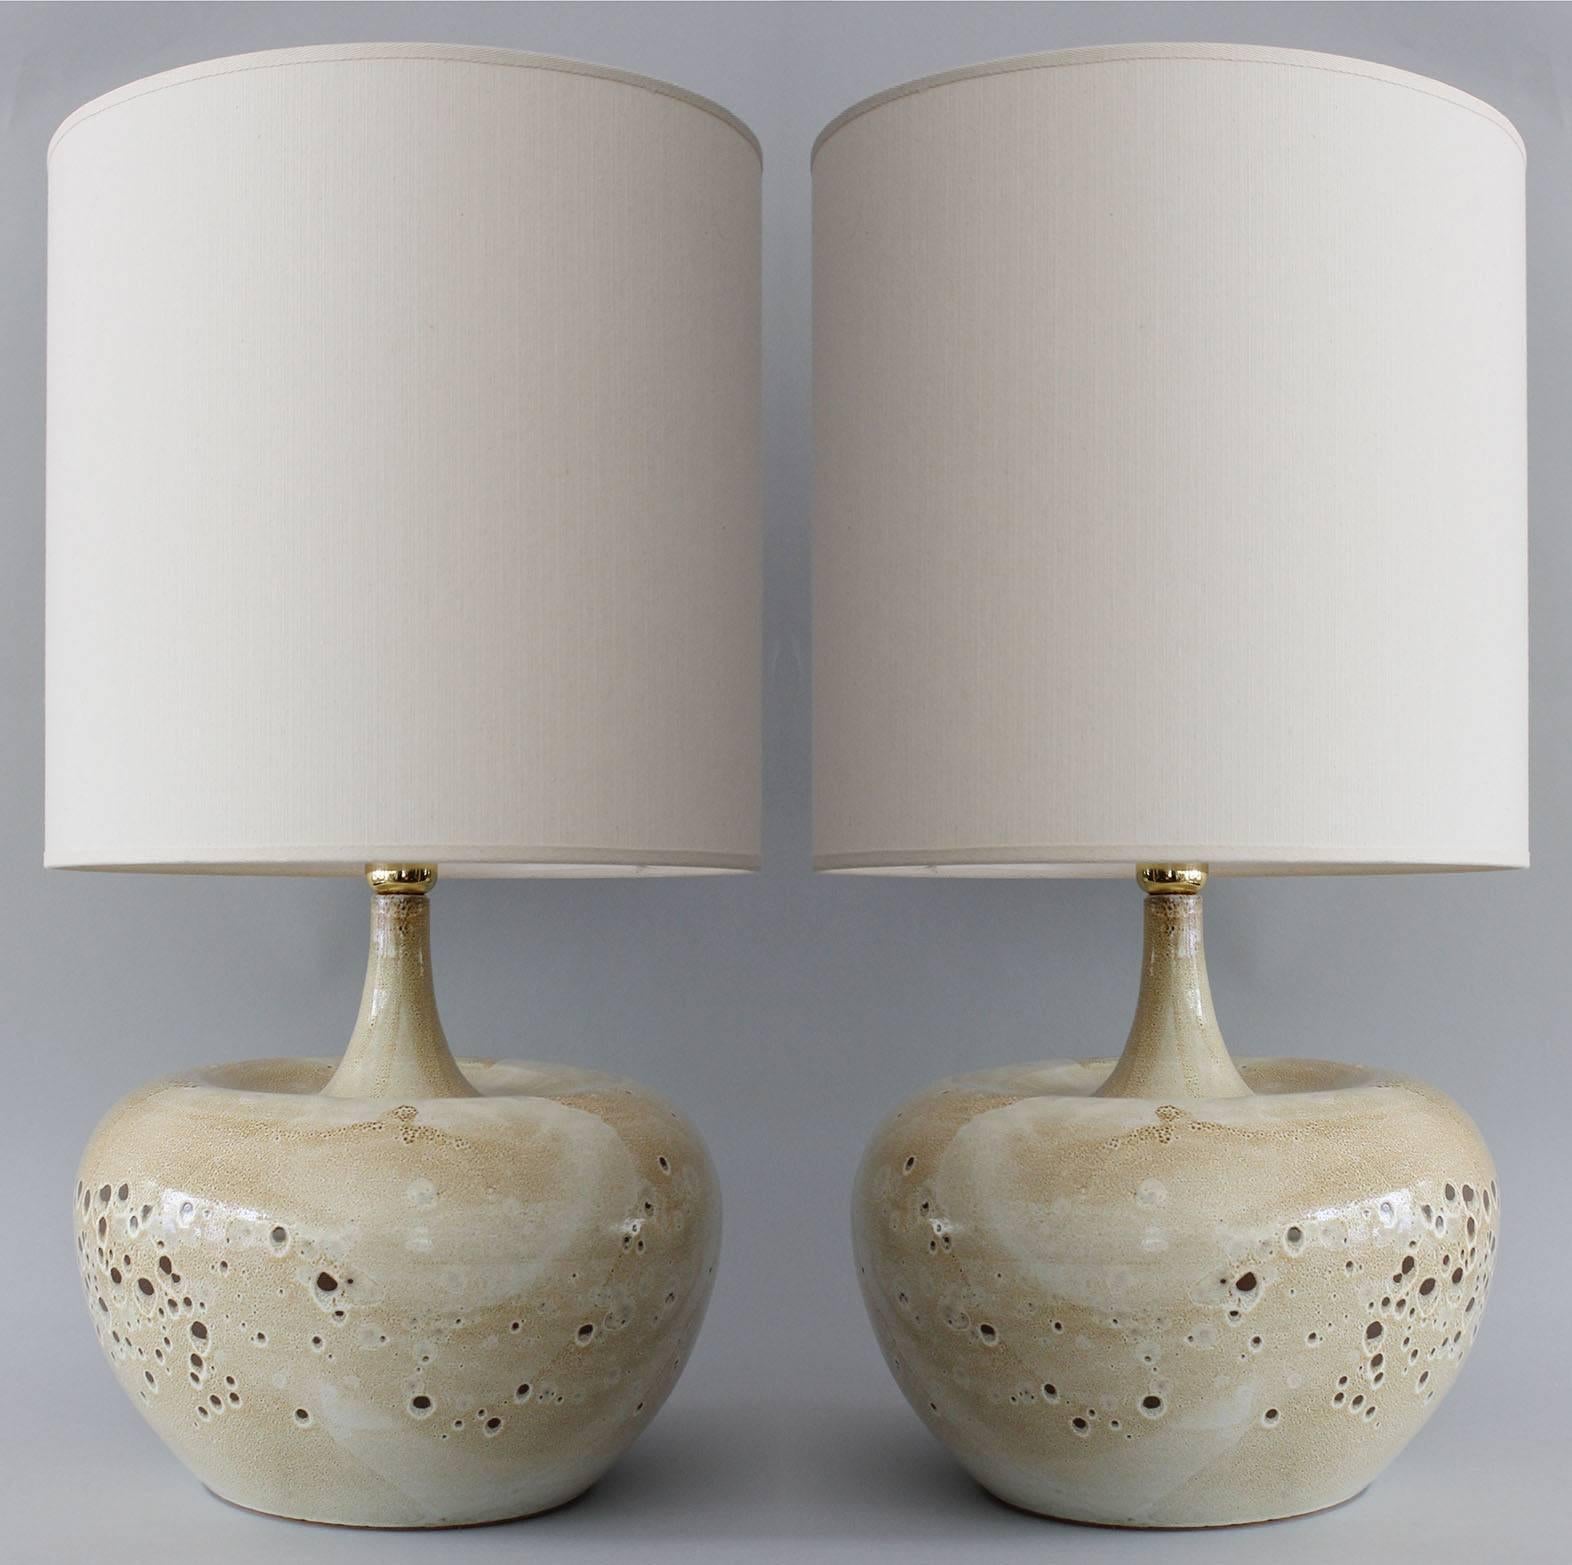 A pair of Italian ceramic lamps with sandy speckled glaze and brass details.

Shades for photography only.

Height measurement is to top of brass detail.